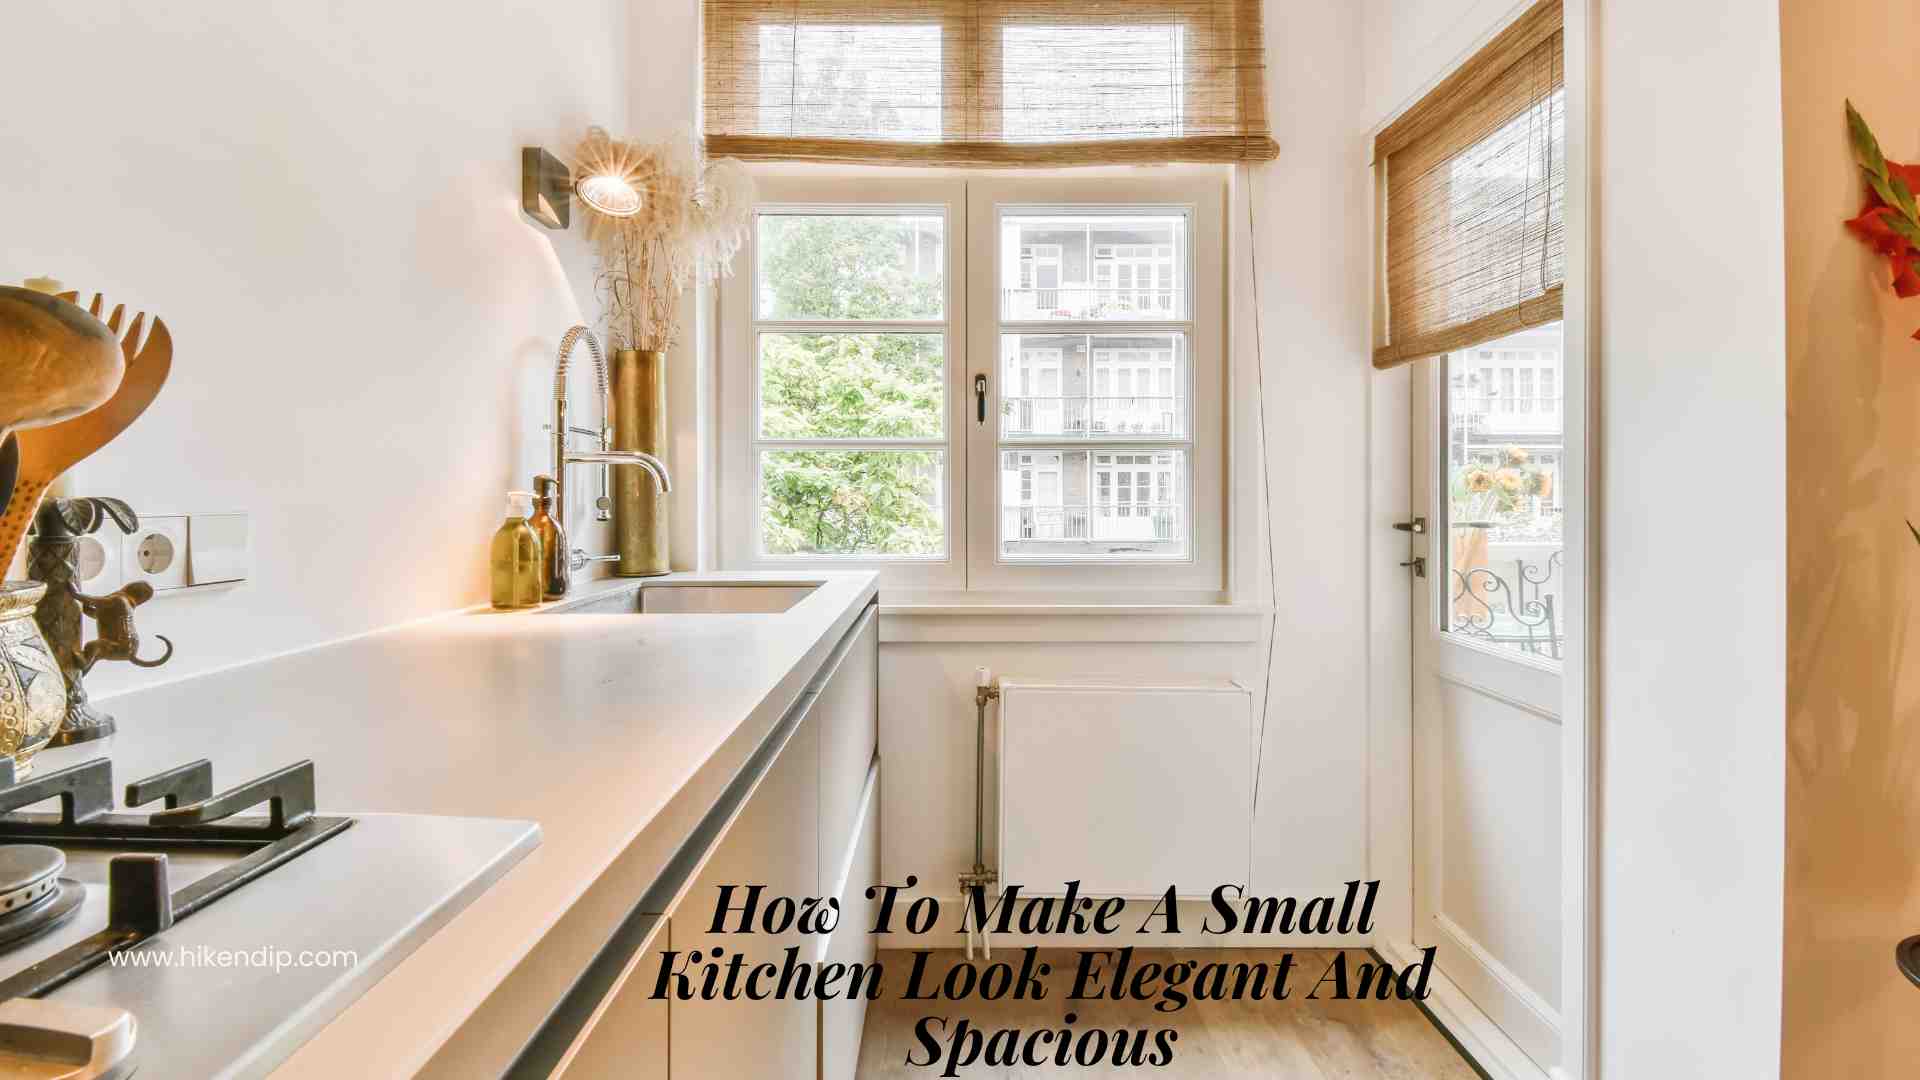 How To Make A Small Kitchen Look Elegant And Spacious